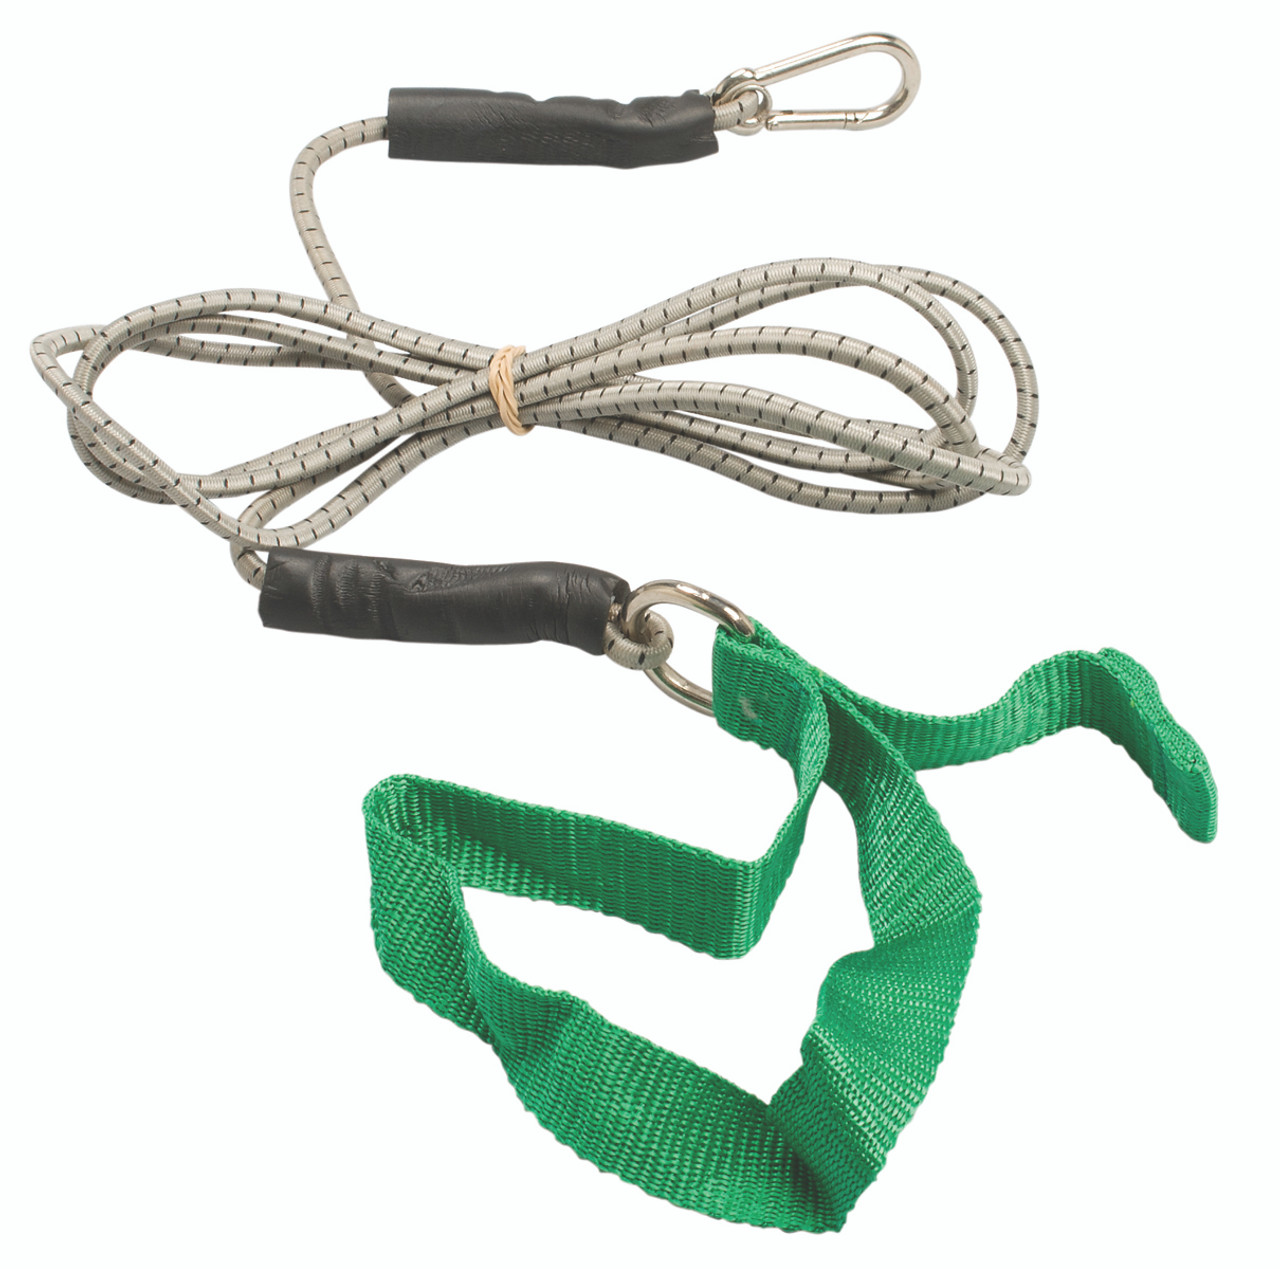 CanDo¨ exercise bungee cord with attachments, 7', Green - medium